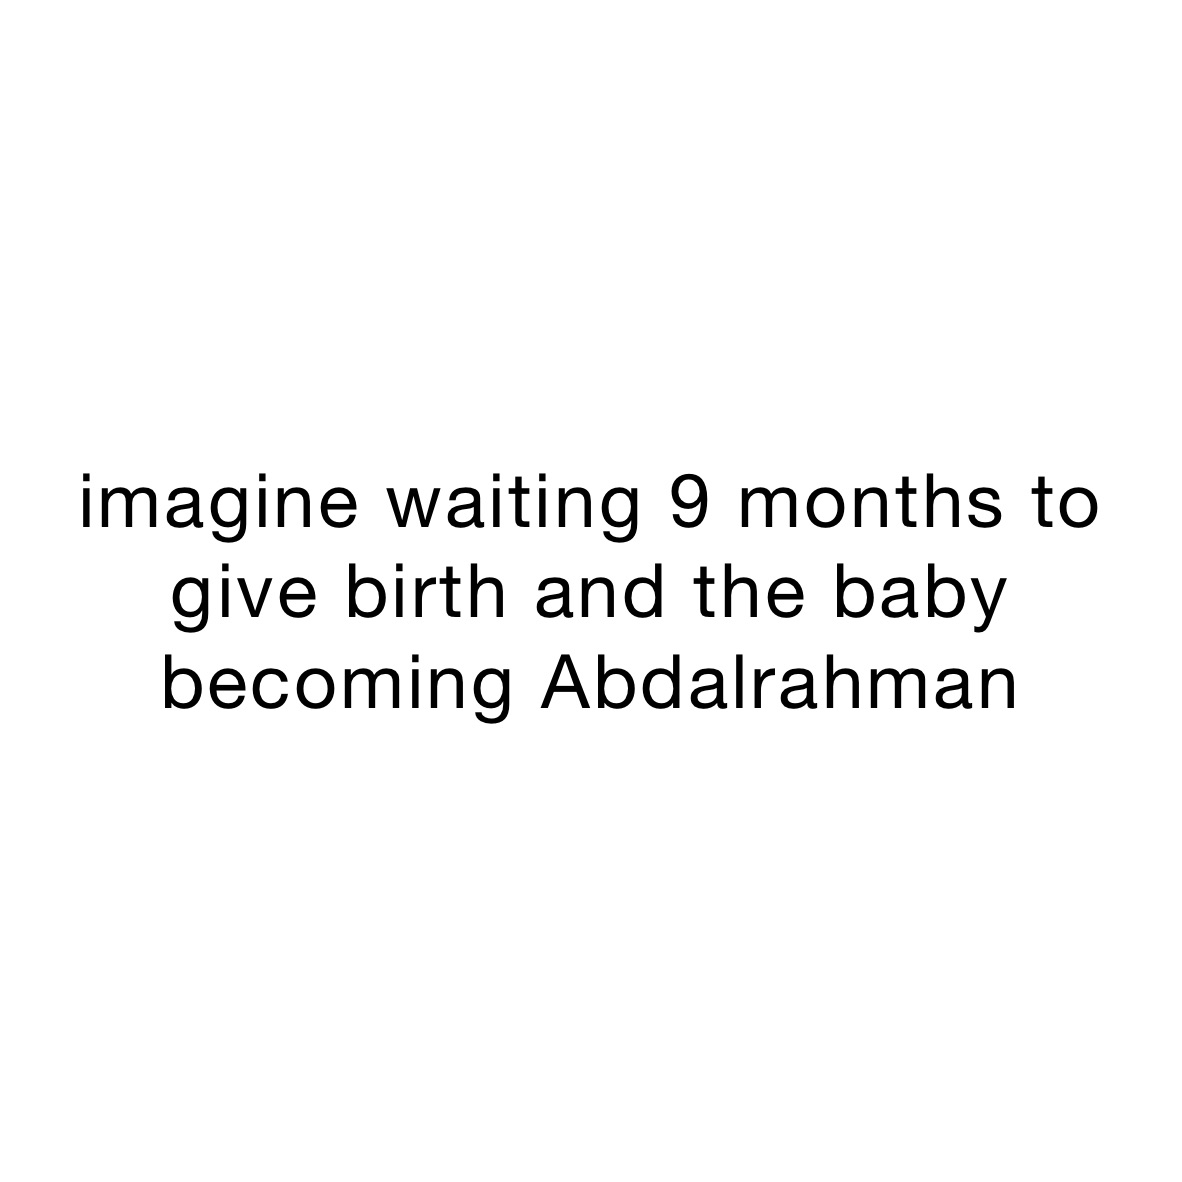 imagine waiting 9 months to give birth and the baby becoming Abdalrahman 